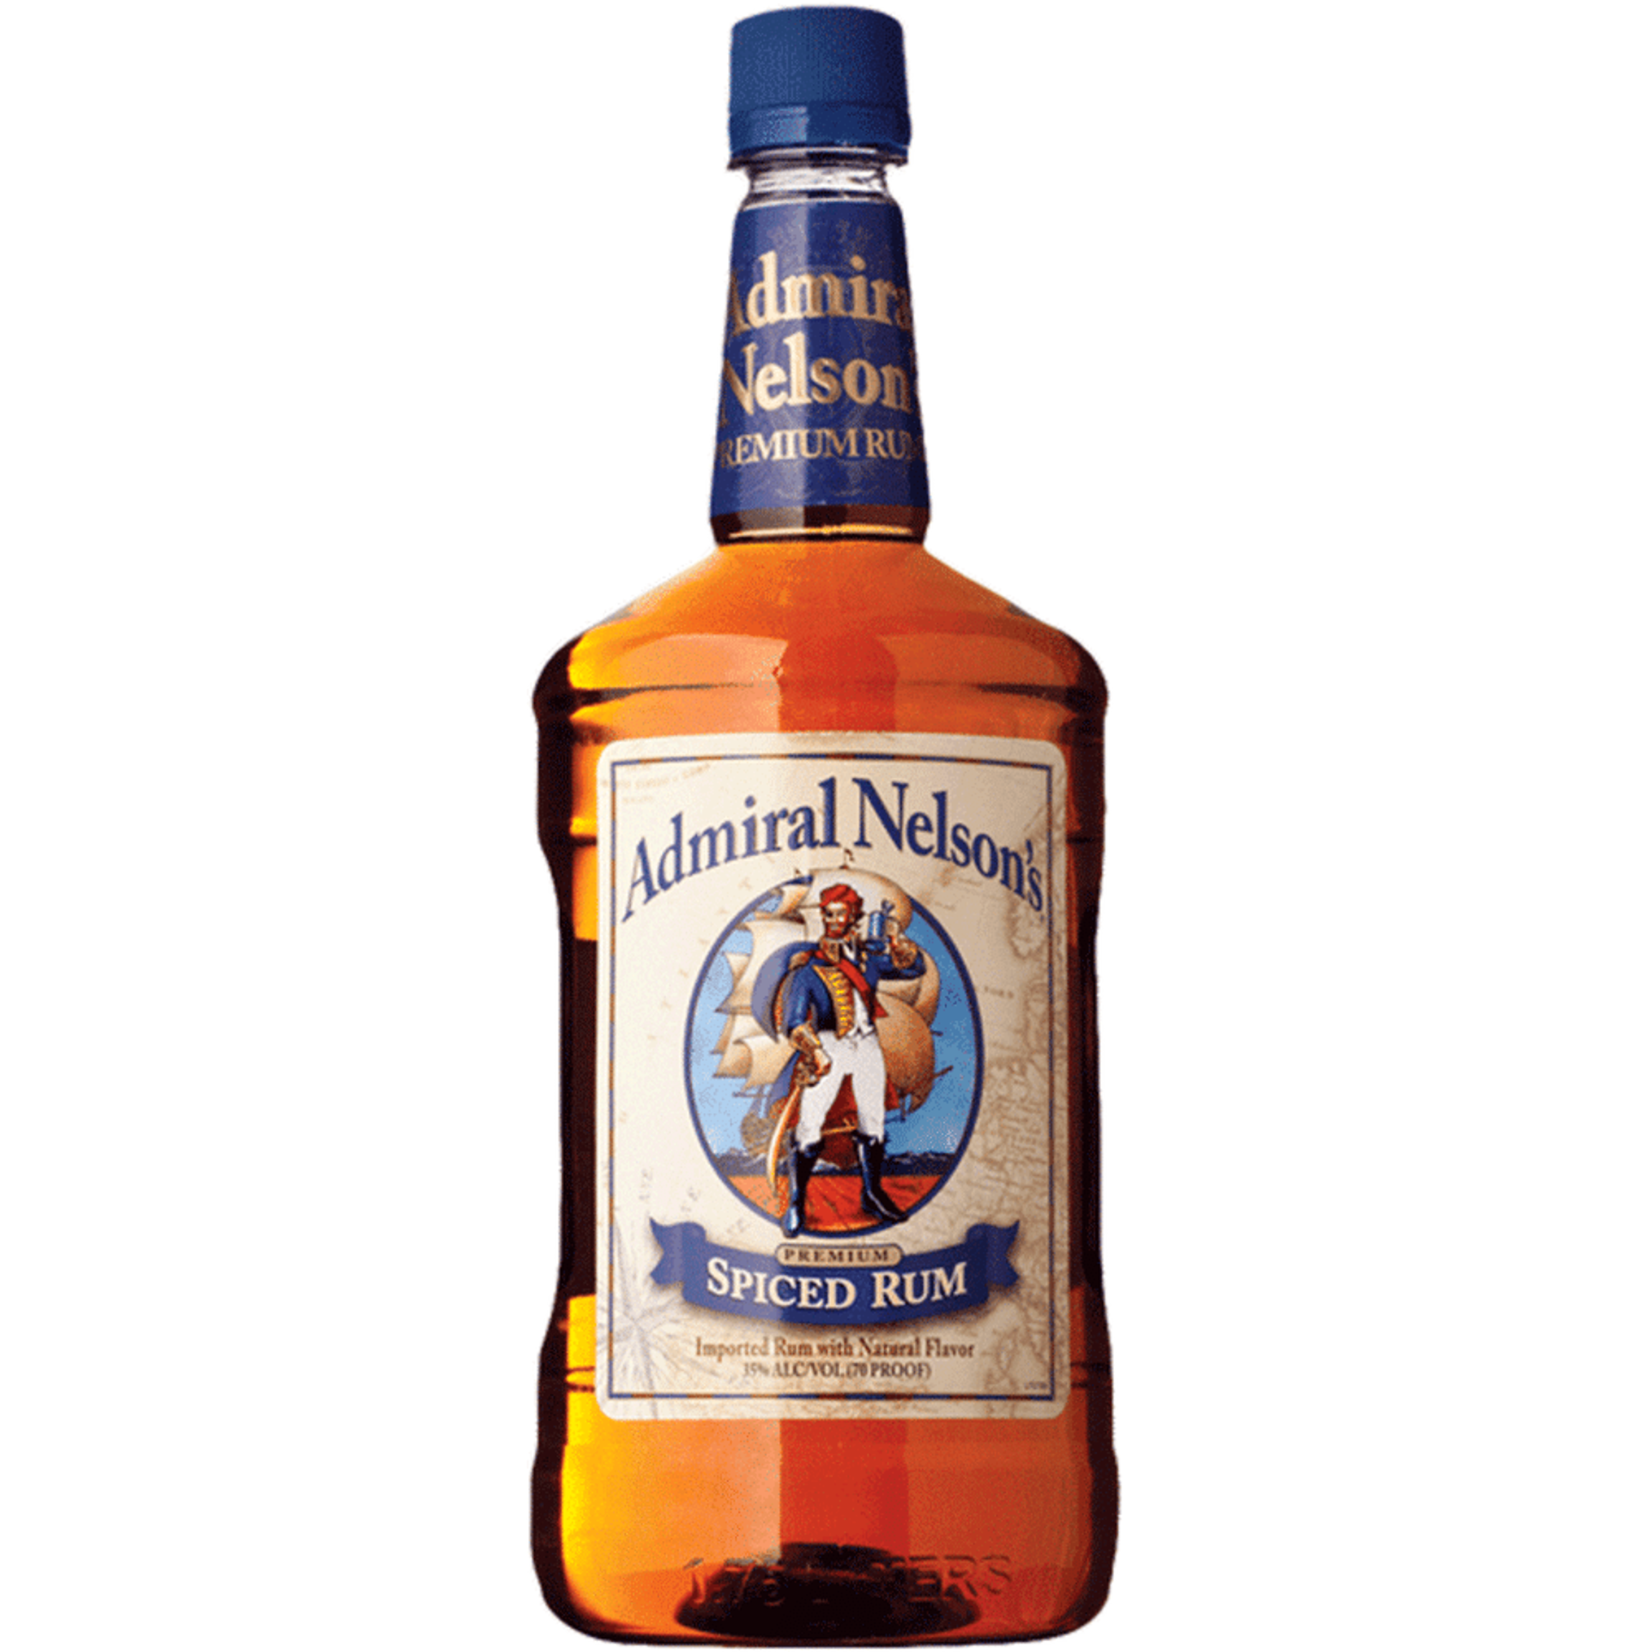 ADMIRAL NELSON SPICED RUM 1.75 LTR